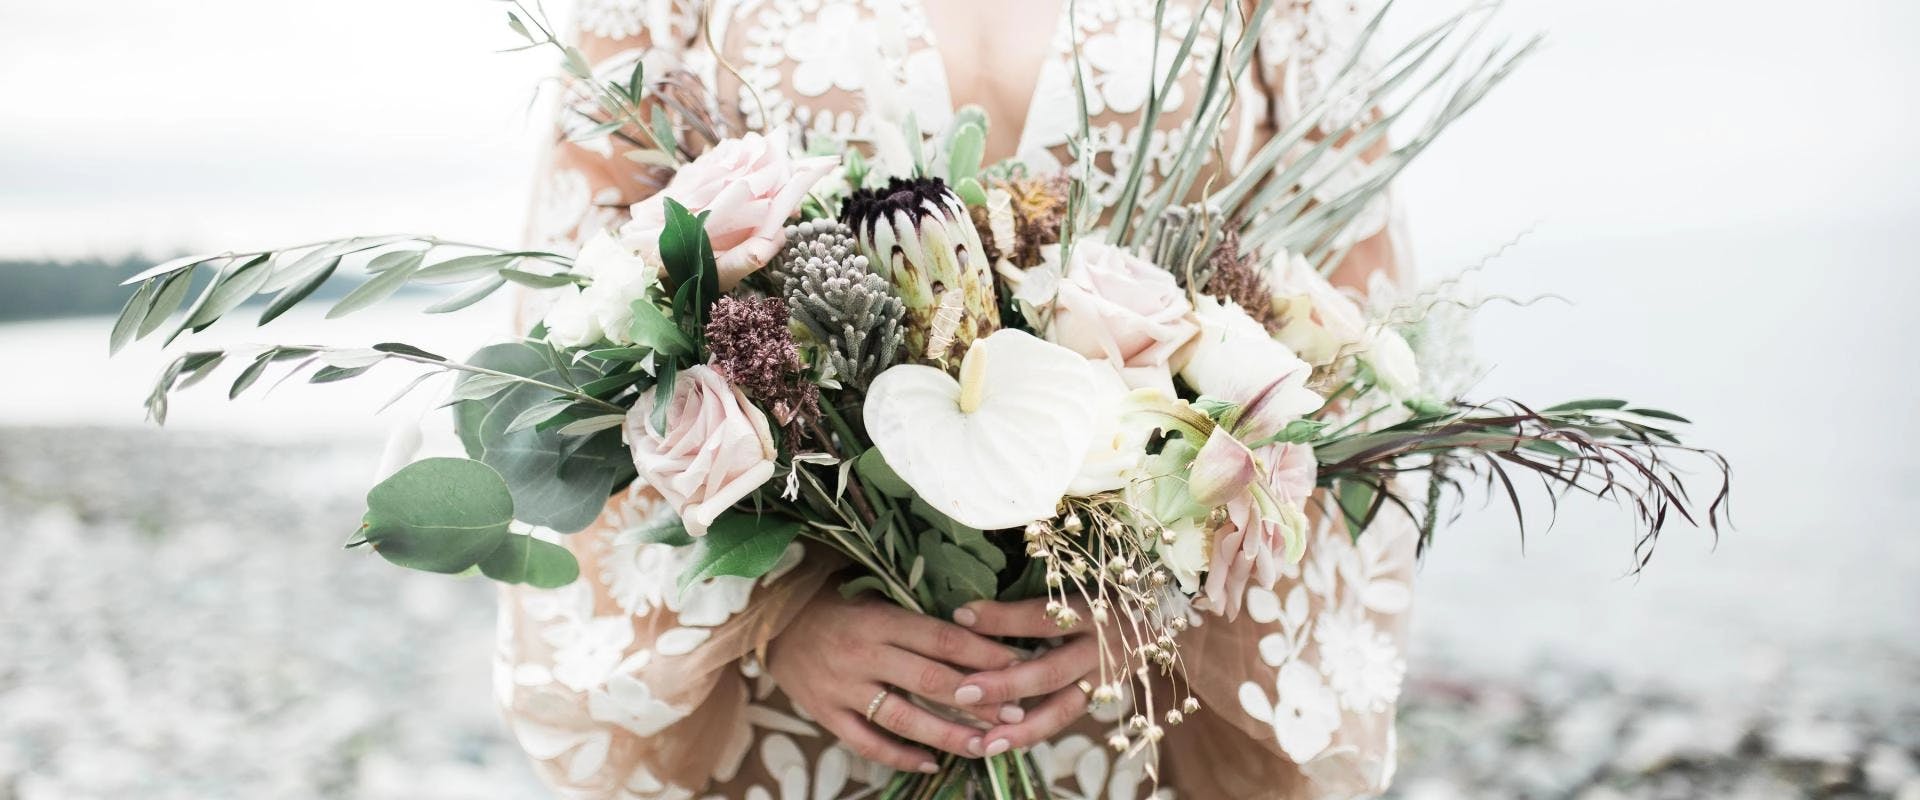 Bouquet and wedding ring. Bride in white dress